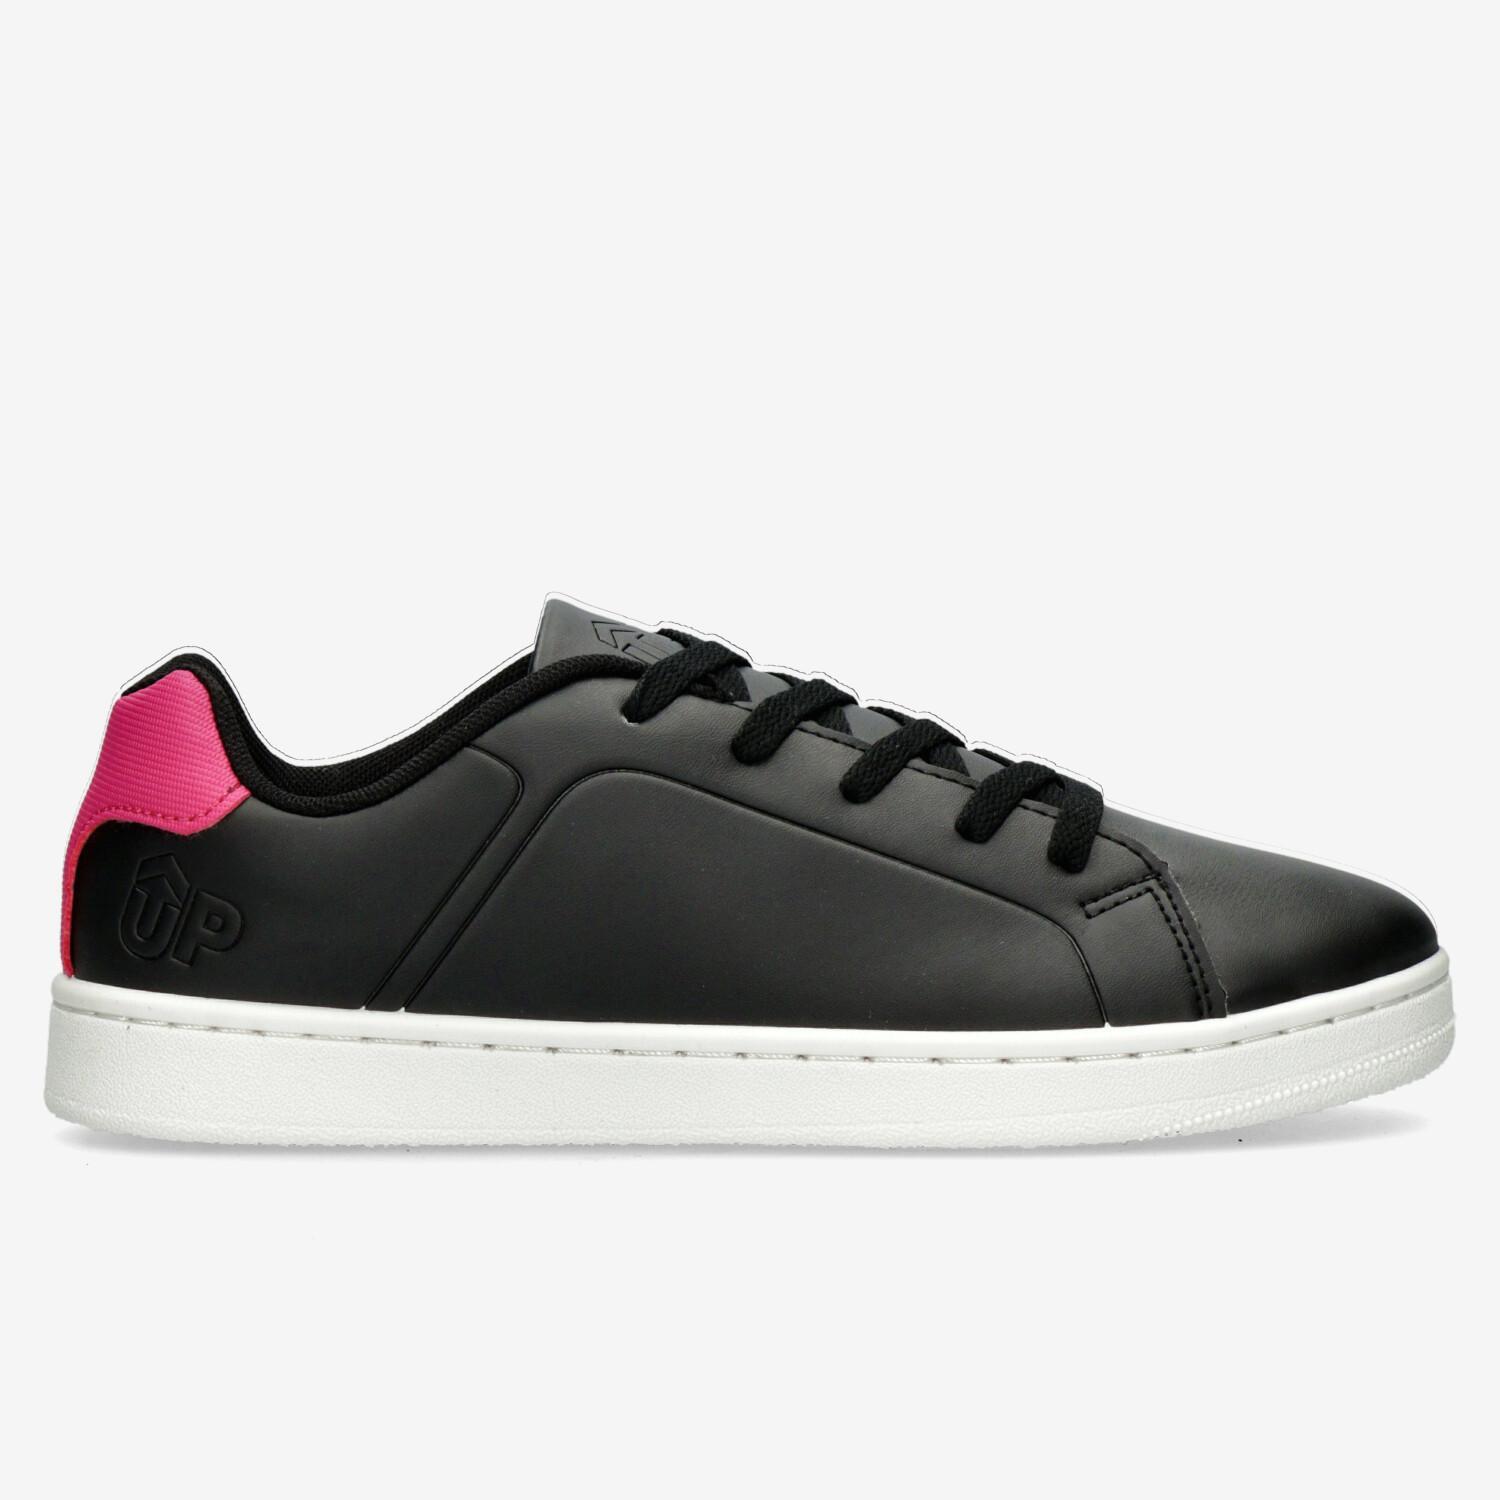 Up Arena - Noir - Chaussures baskets Femme sports taille 37